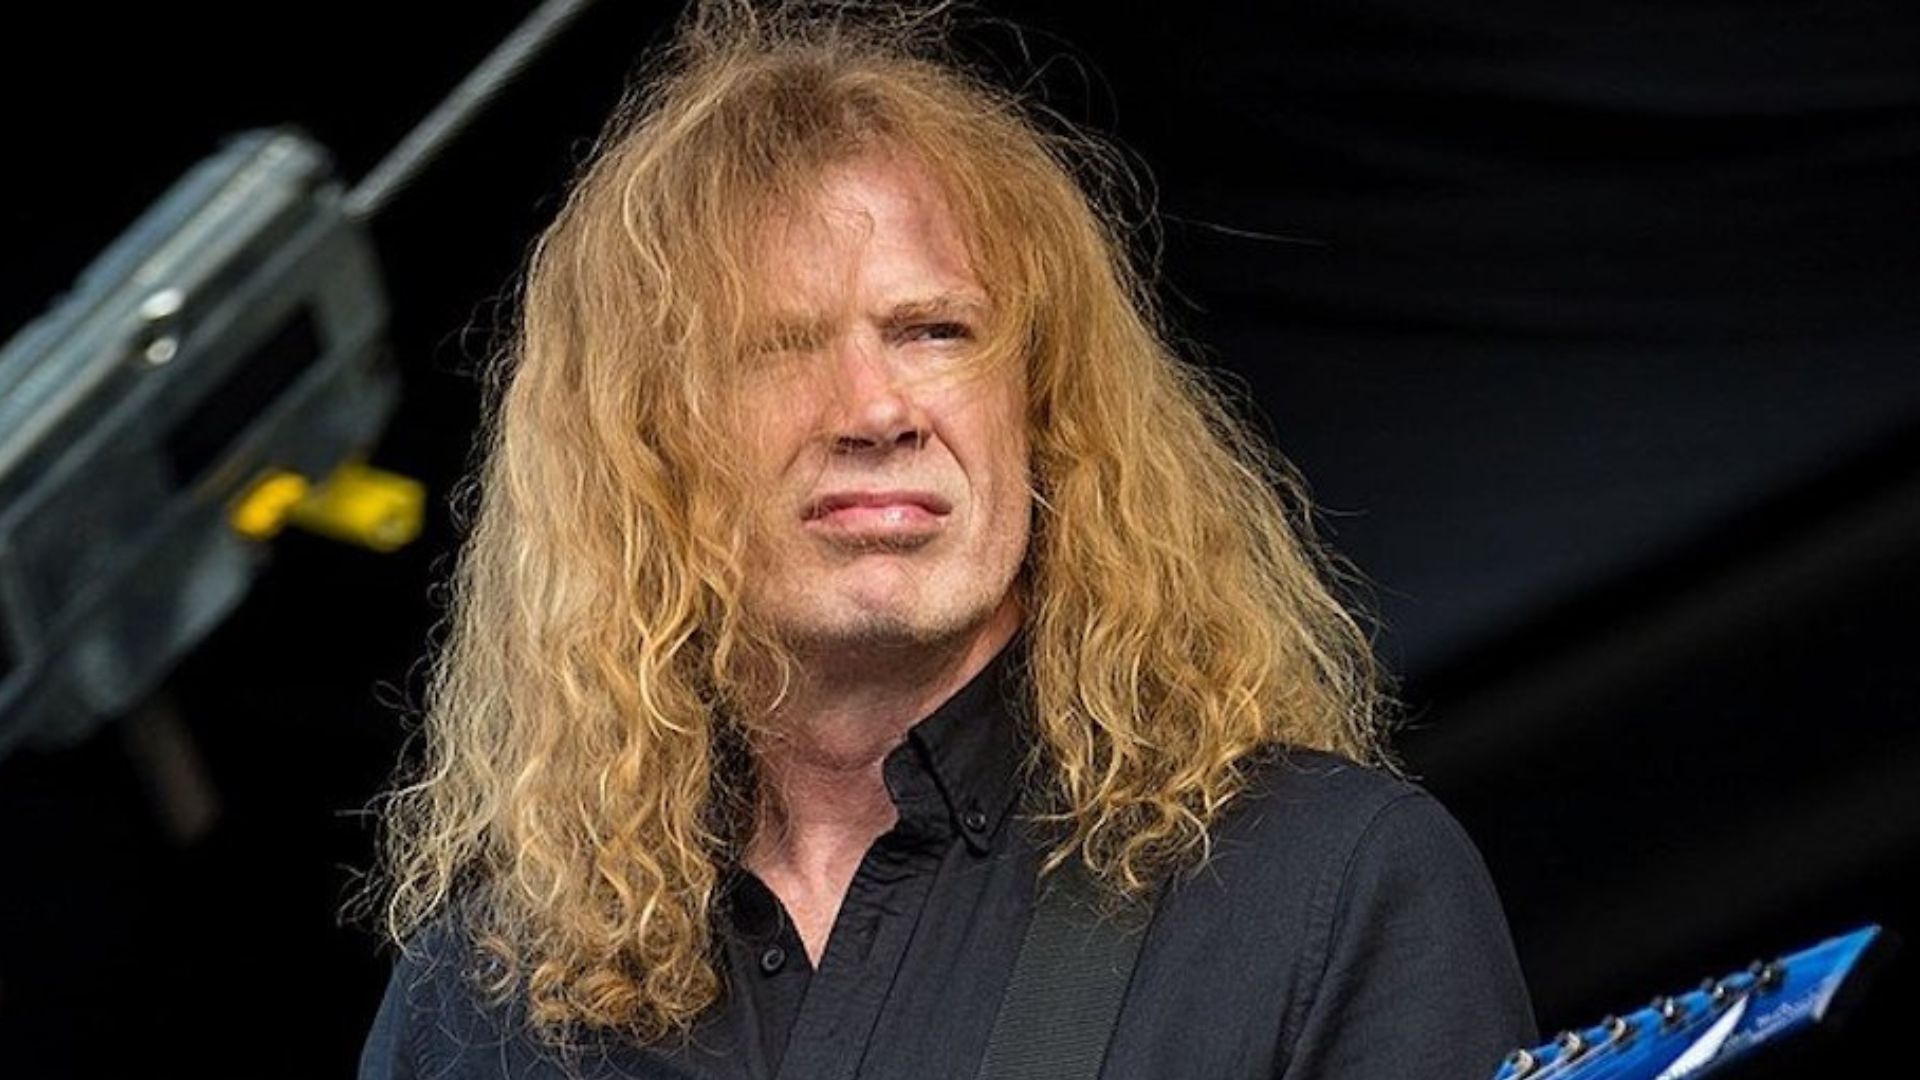 MEGADETH’s DAVE MUSTAINE Responds To Being Called ‘Mild’ Person By Japanese Press: ‘F**k You!’